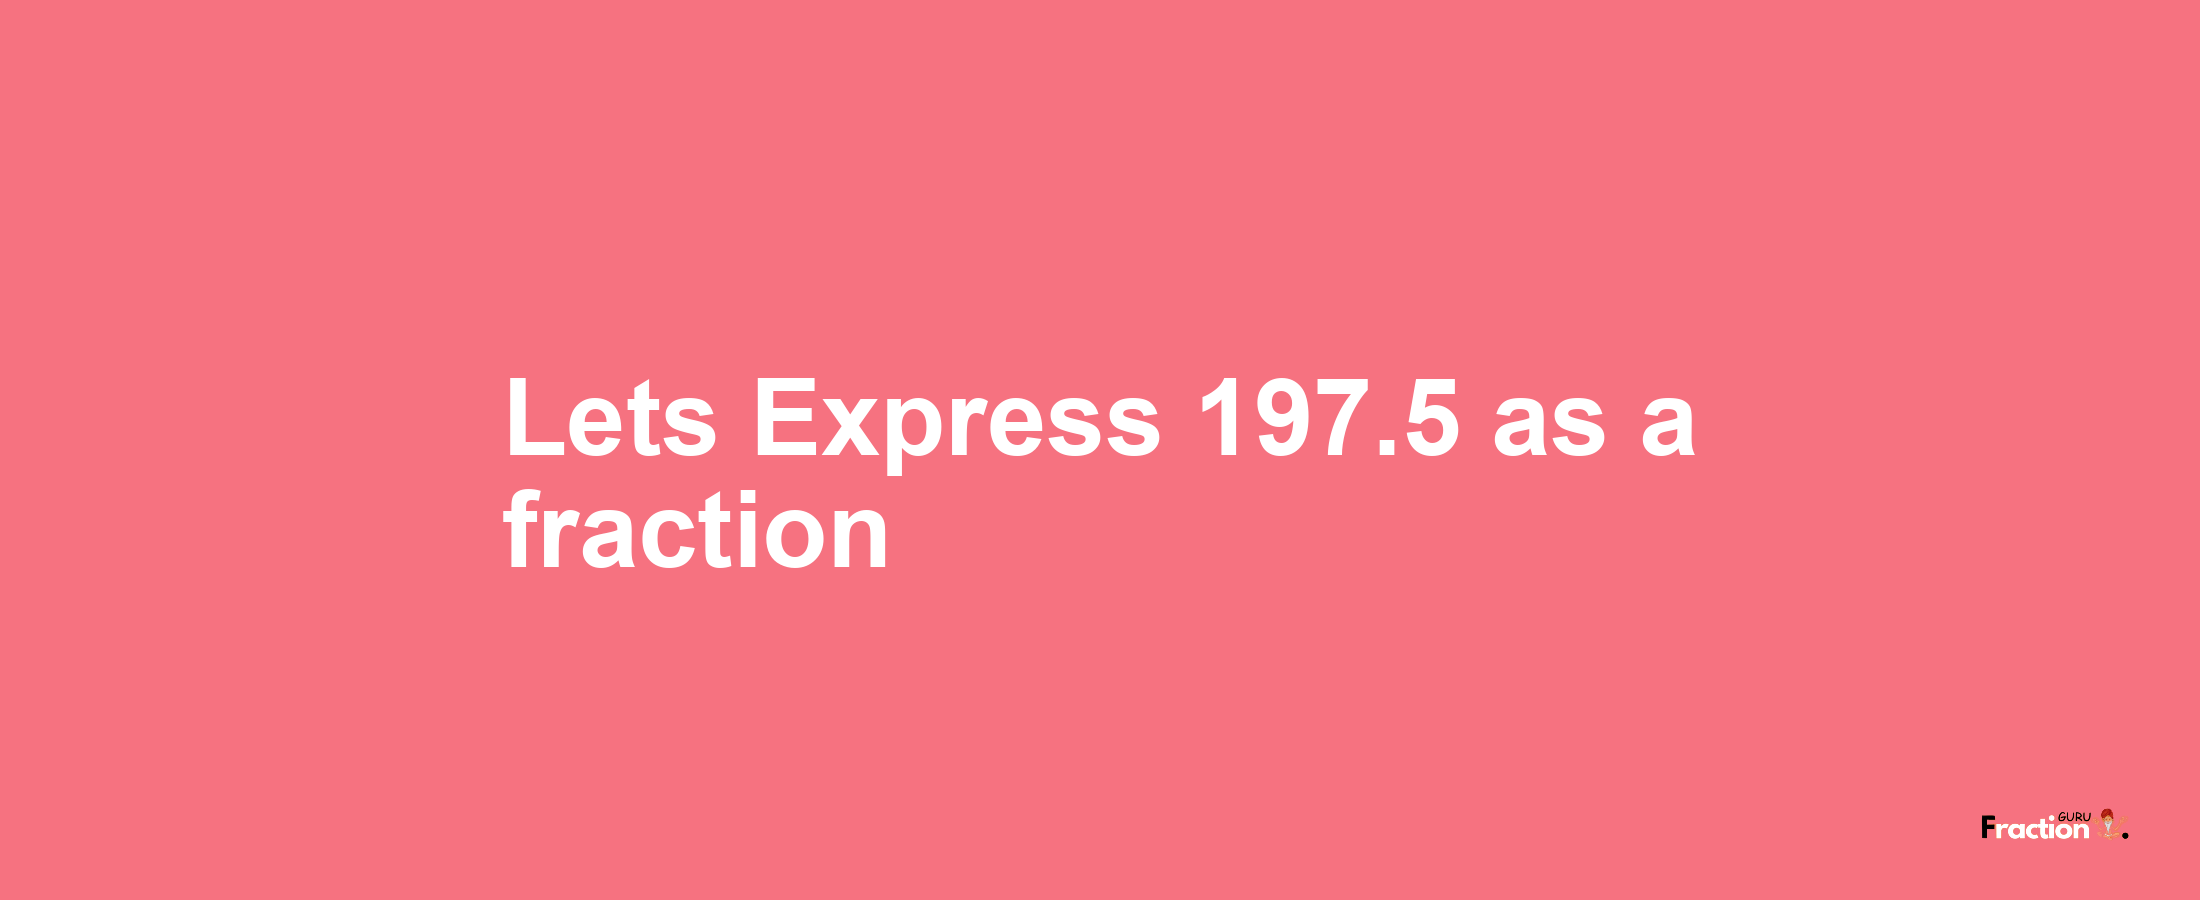 Lets Express 197.5 as afraction